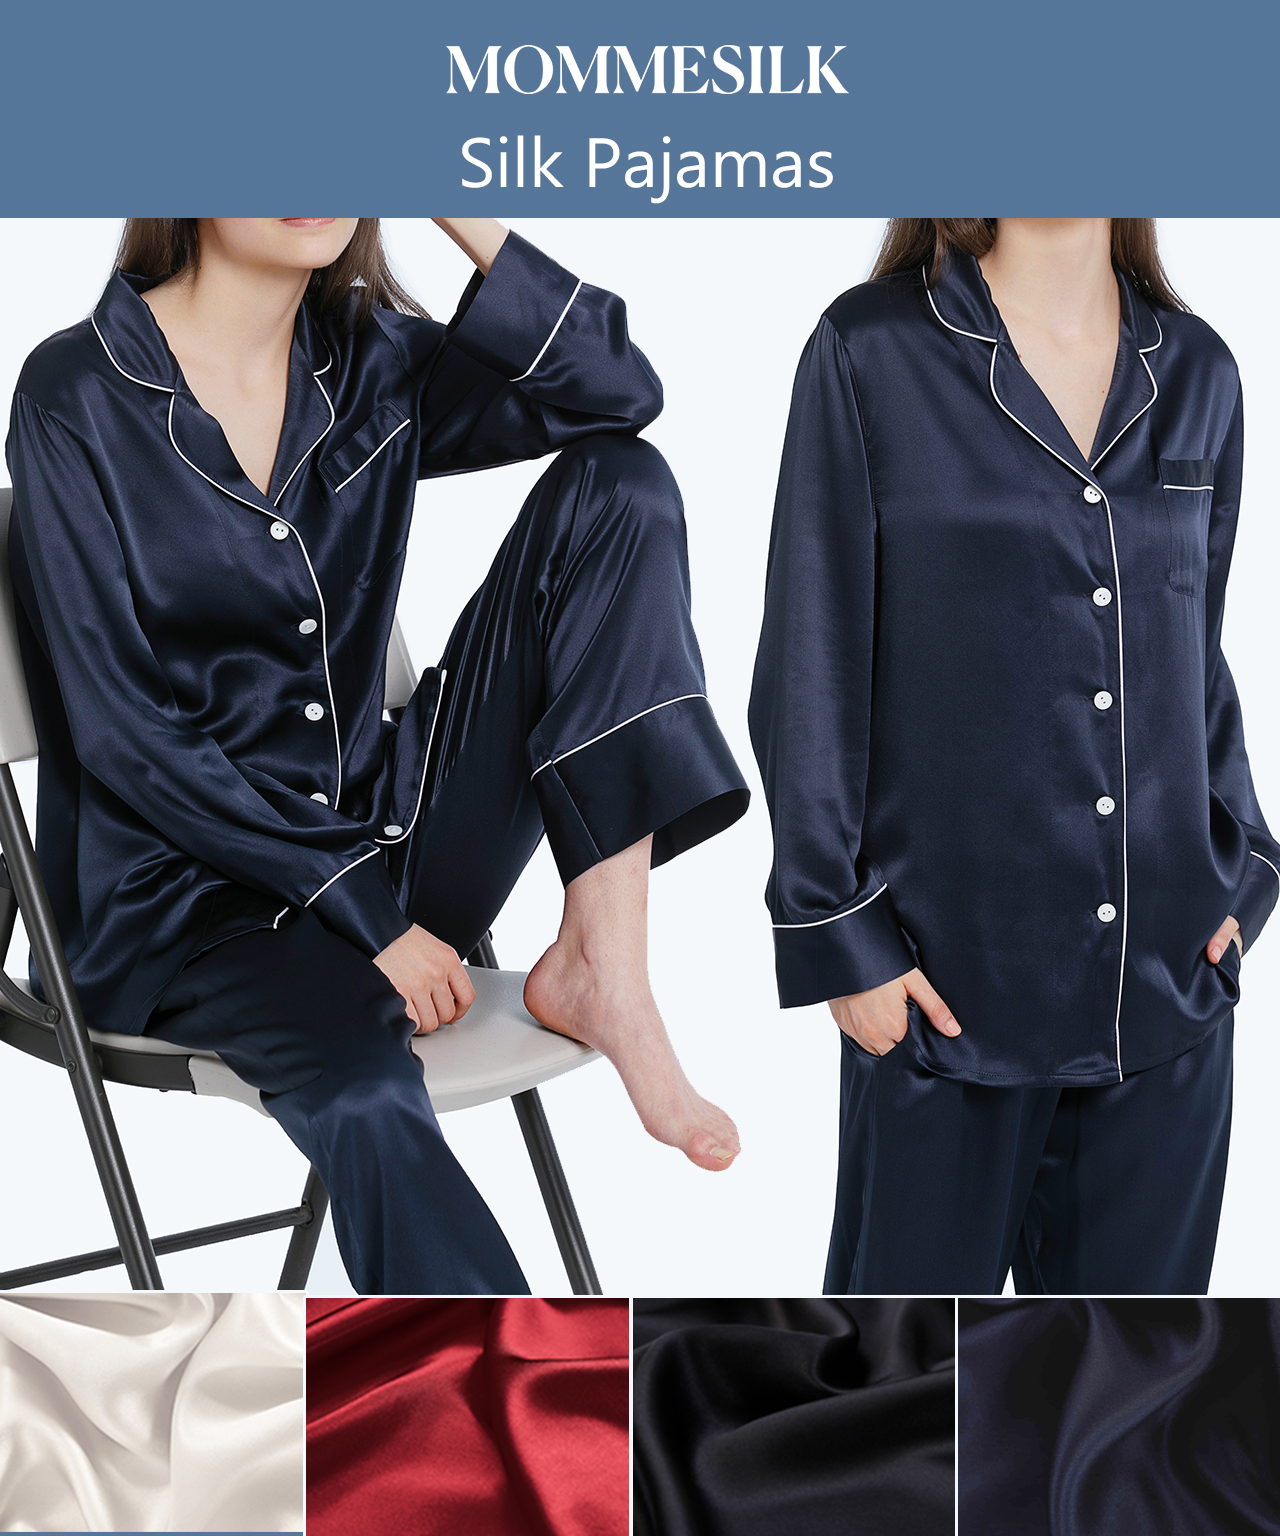 At Home - Piped Silk Pajamas Set for Women